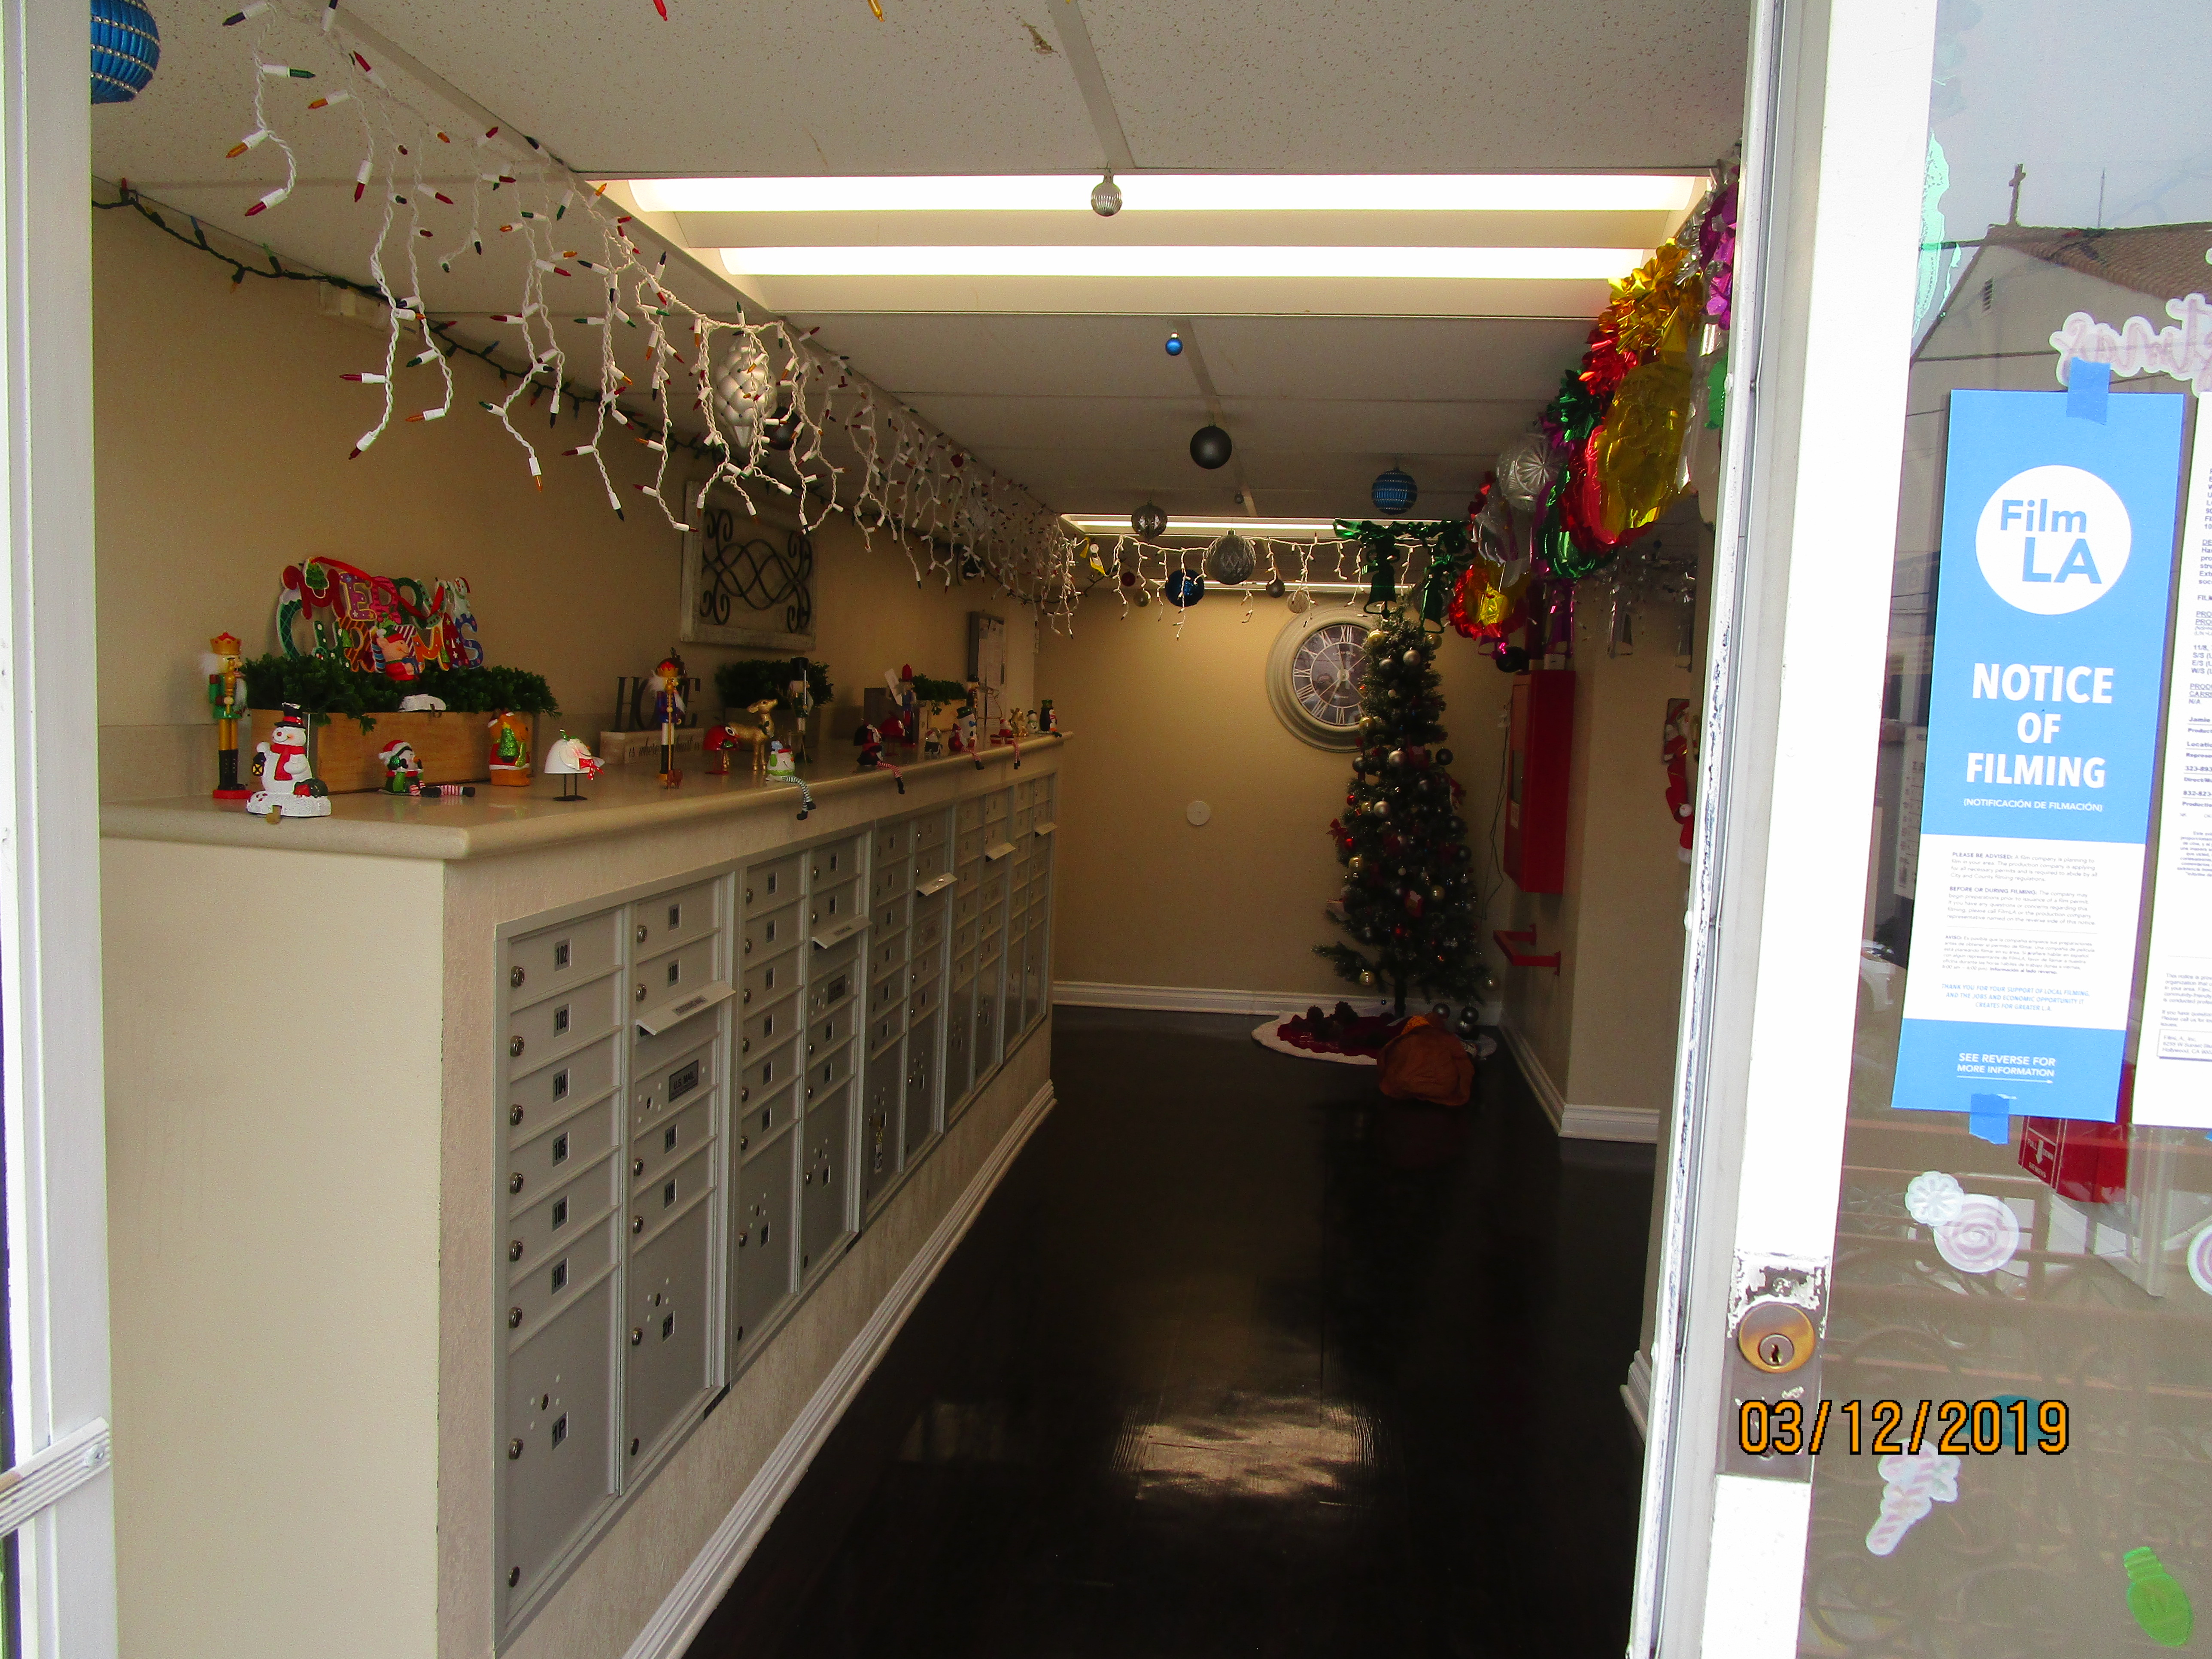 View of a mail room, lights and Christmas ornaments hanging from the office-like ceiling, ornaments on top of the mailboxes shelve, A christmas tree on the right side corner at the end of the room, a big decorative clock next to the tree, a notice of film